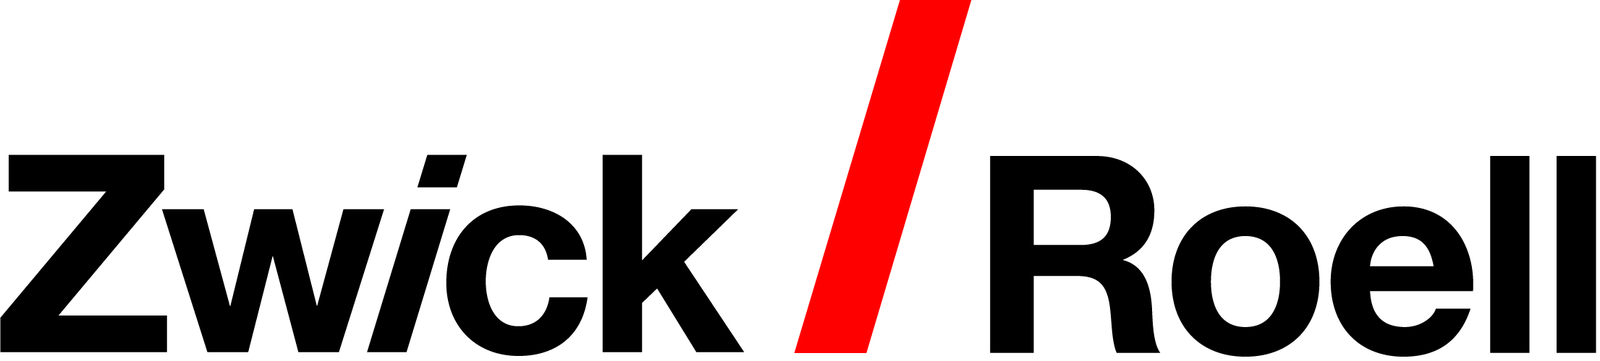 logo_zwick_roell.png